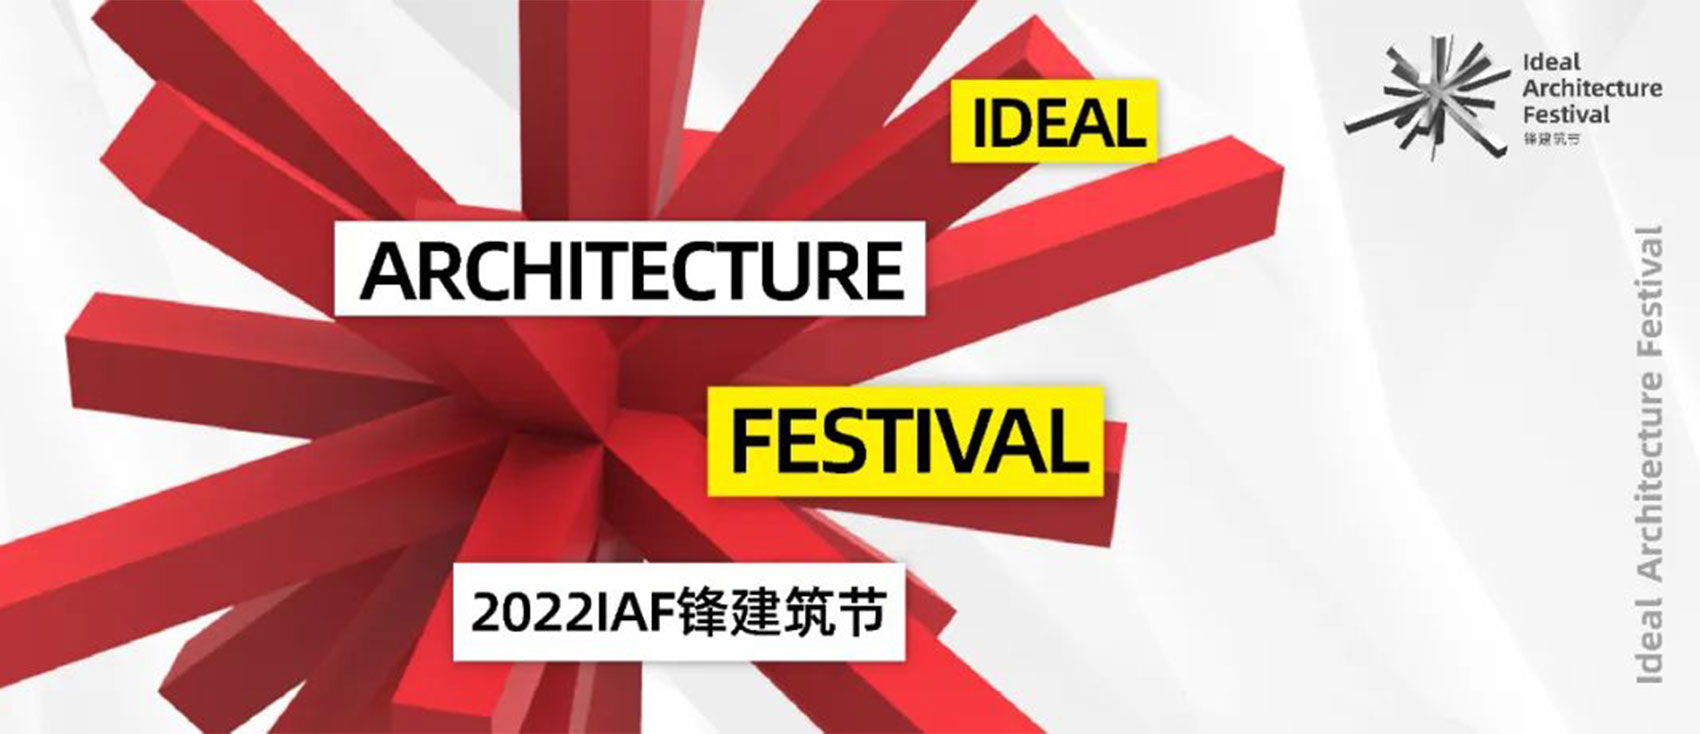 100architects Triumphs at Ideal Architecture Festival (IAF) with Two Bold Projects!